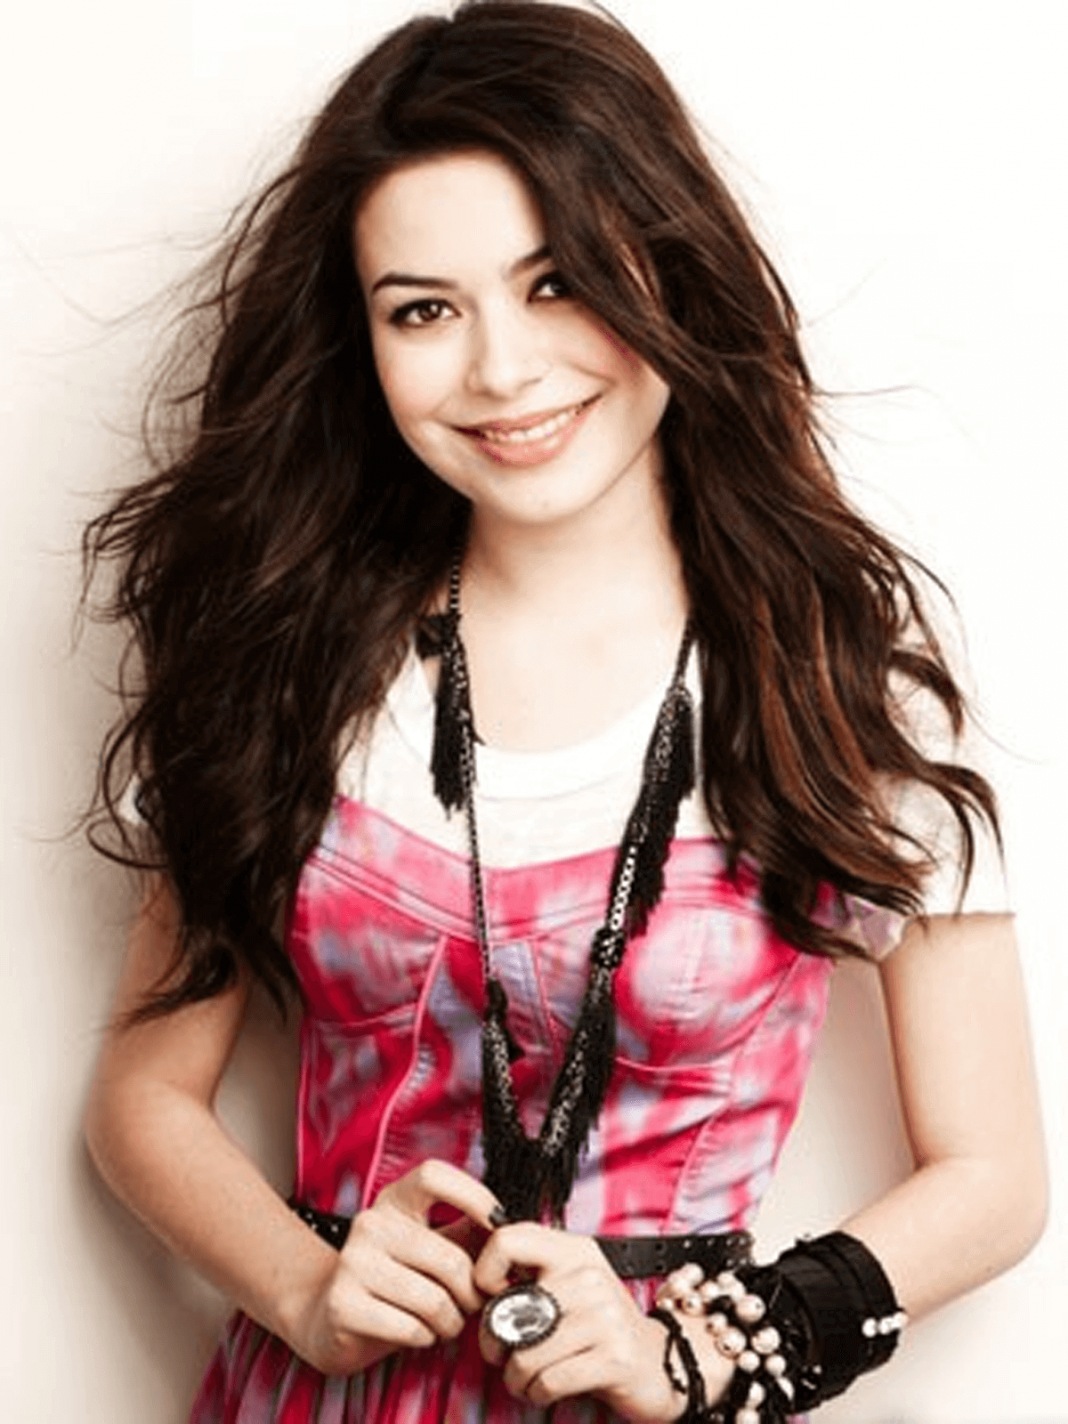 49 Miranda Cosgrove Nude Pictures Which Are Sure To Keep You Charmed With Her Charisma 80